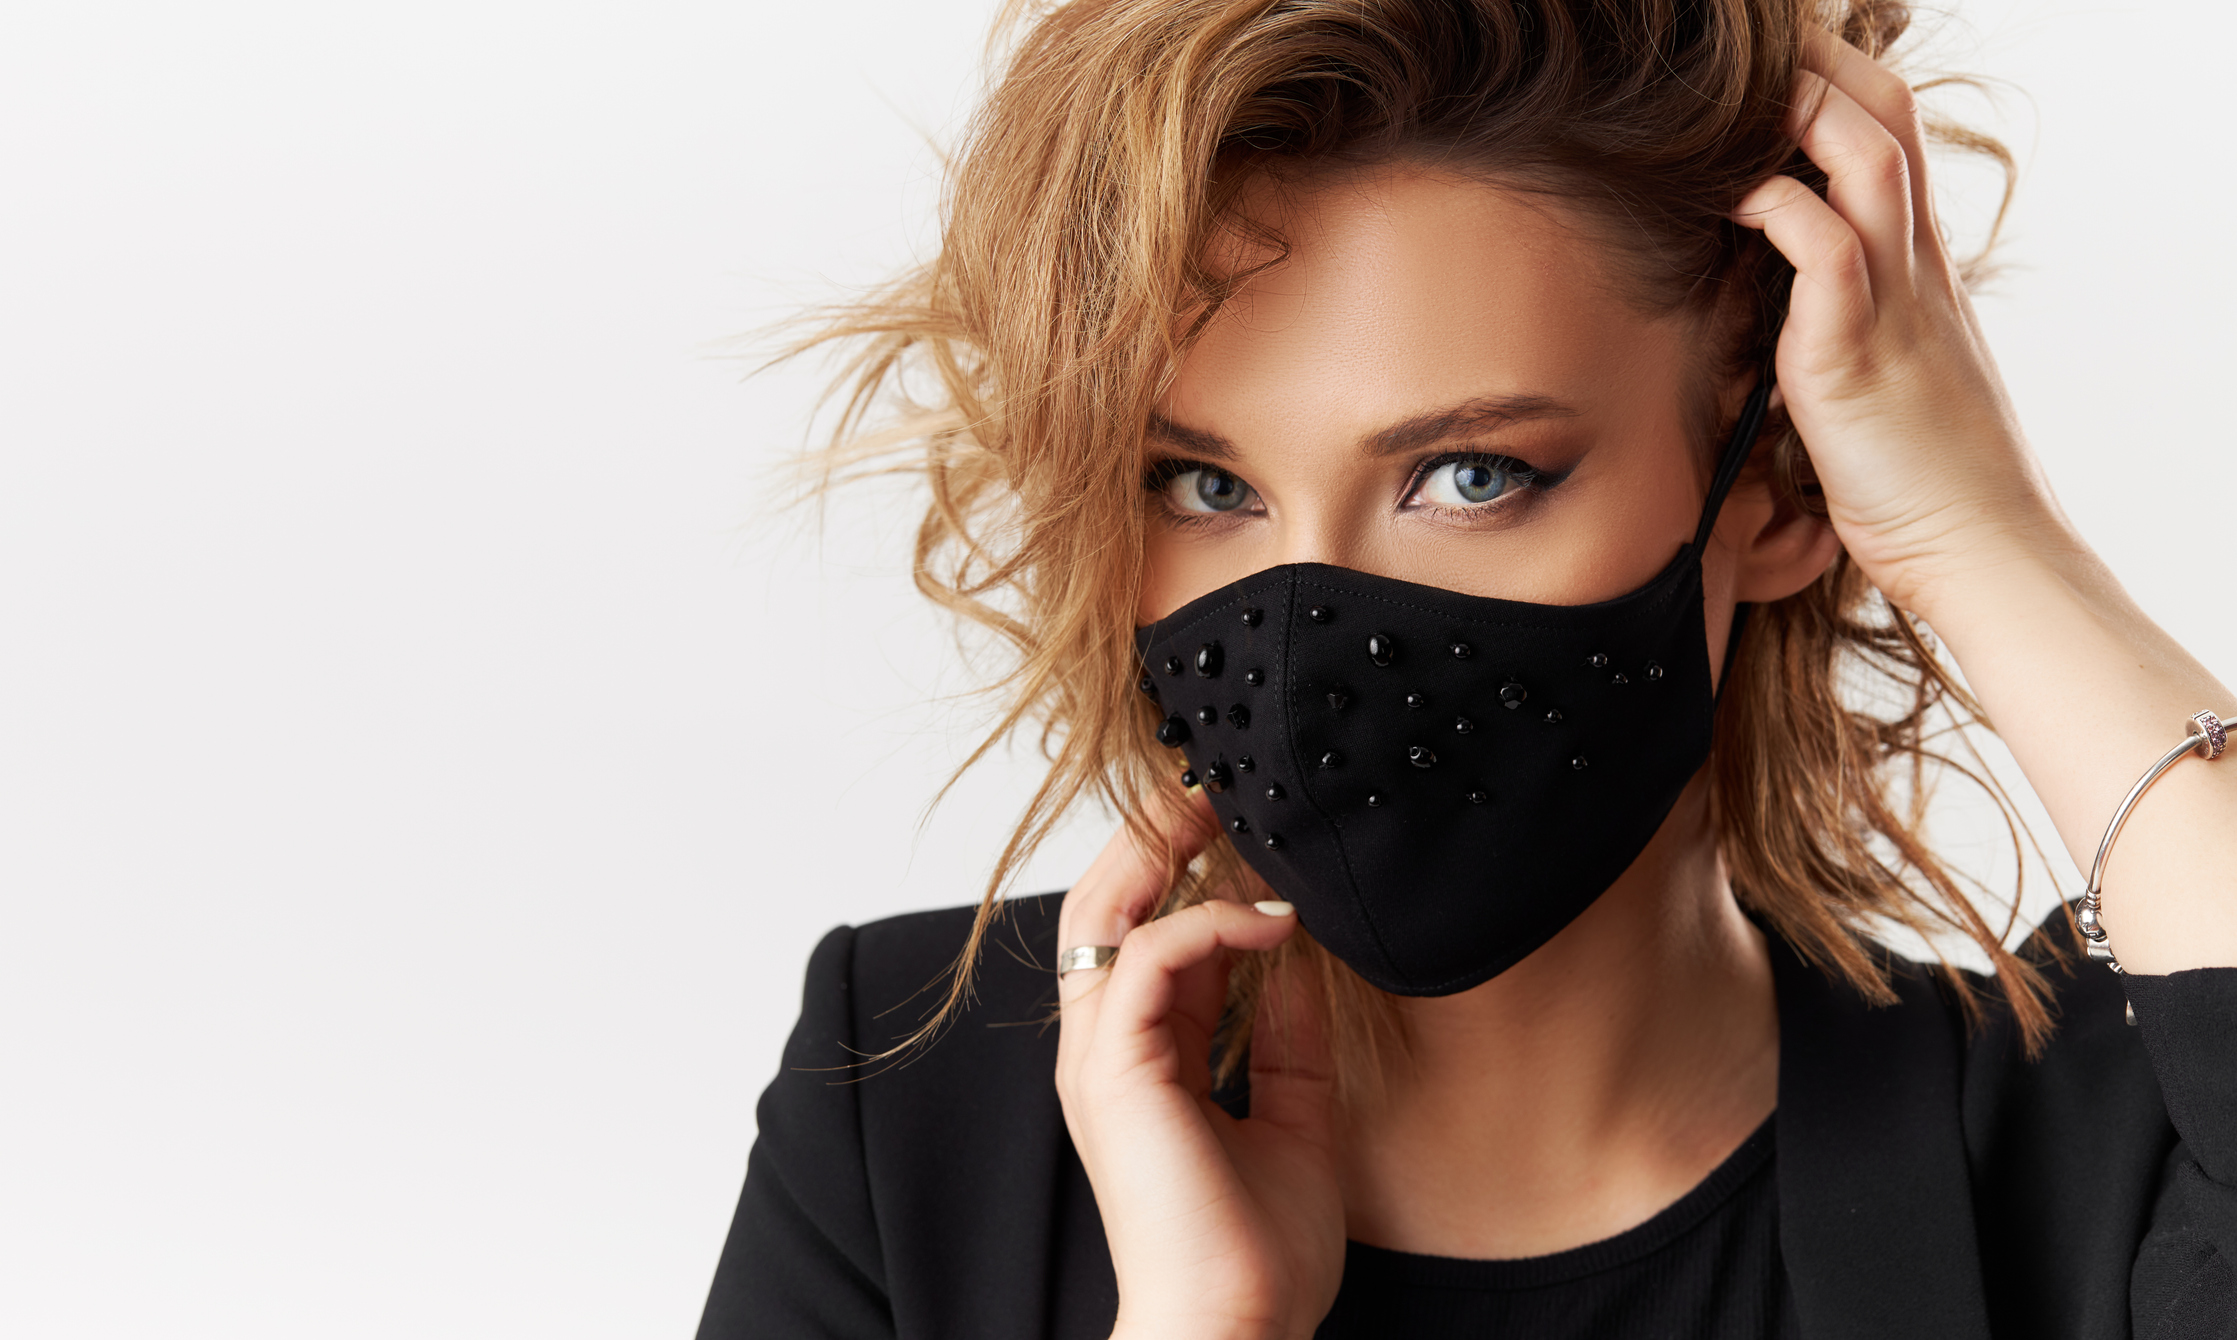 blond woman with blue eyes wearing a black mask and black shirt